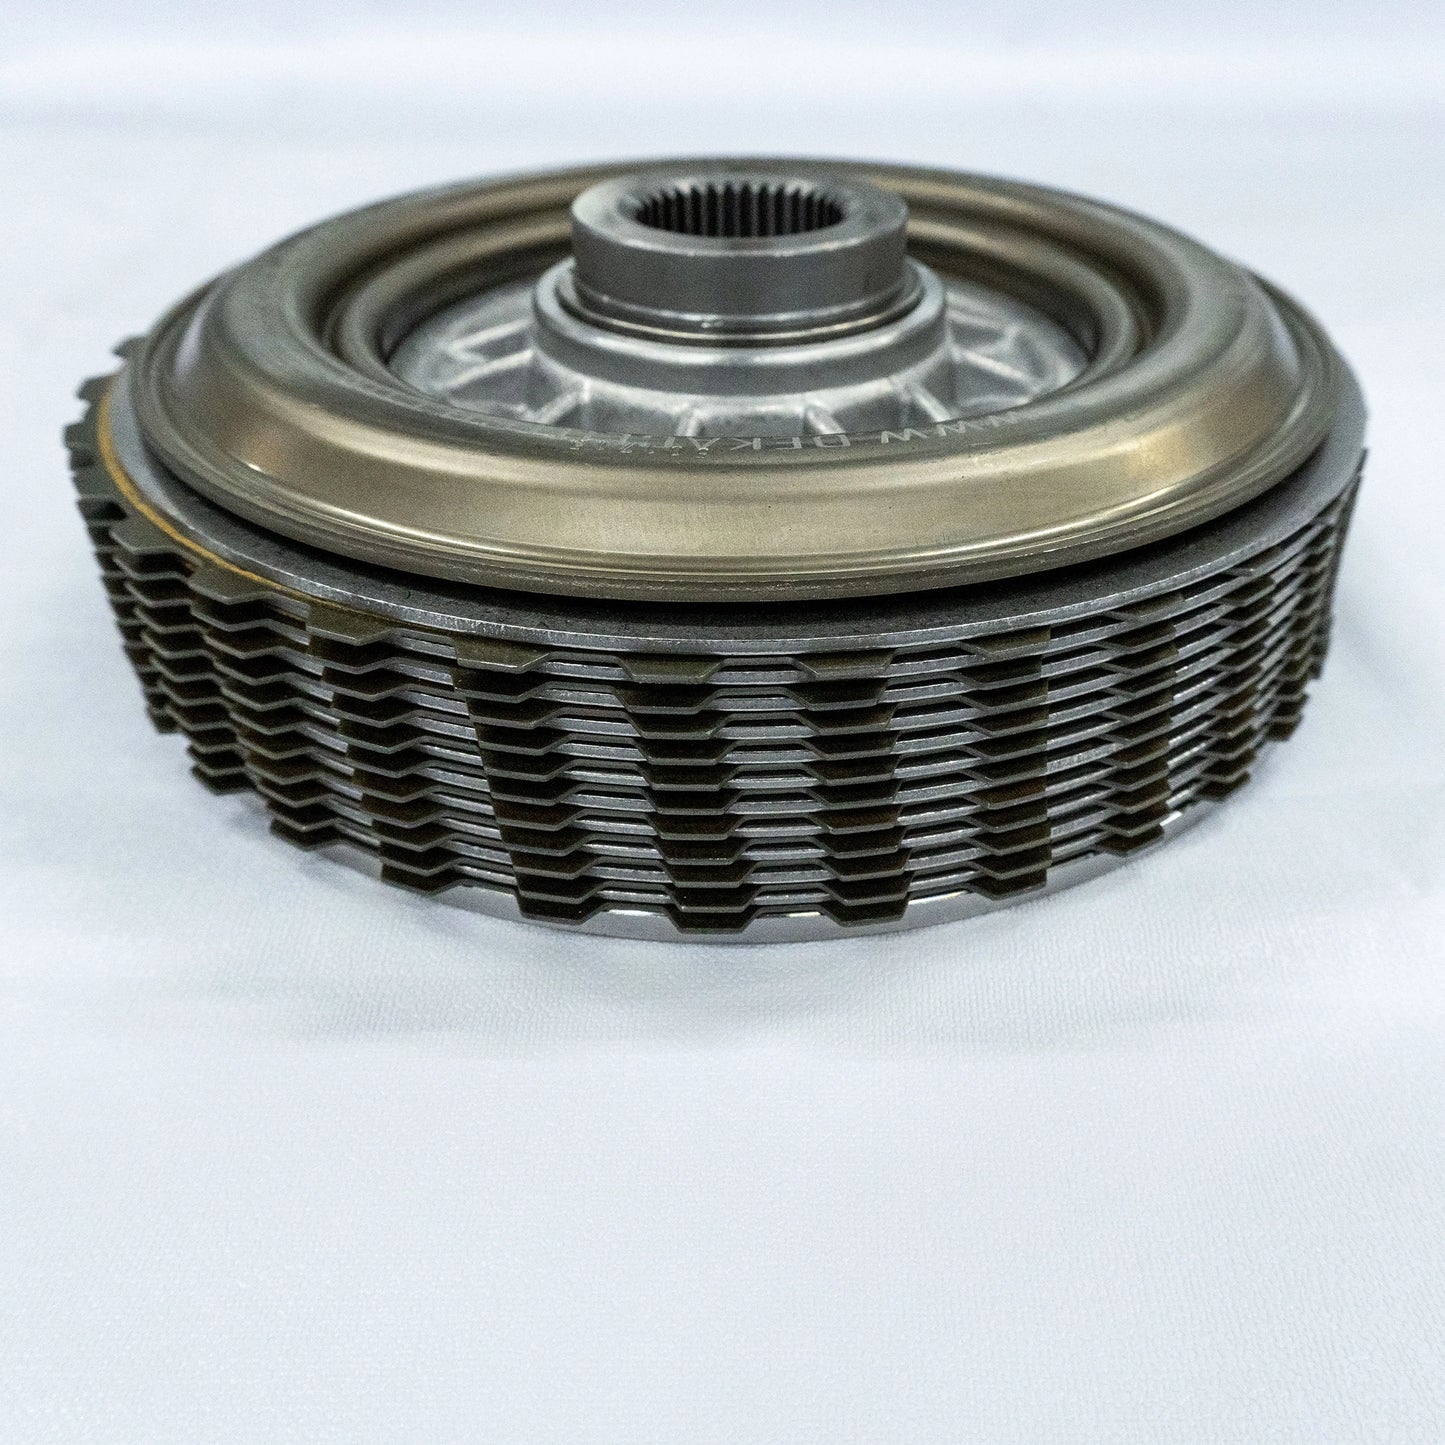 Performance Clutch for BMW ZF 8HP76 Transmissions with upgraded frictions